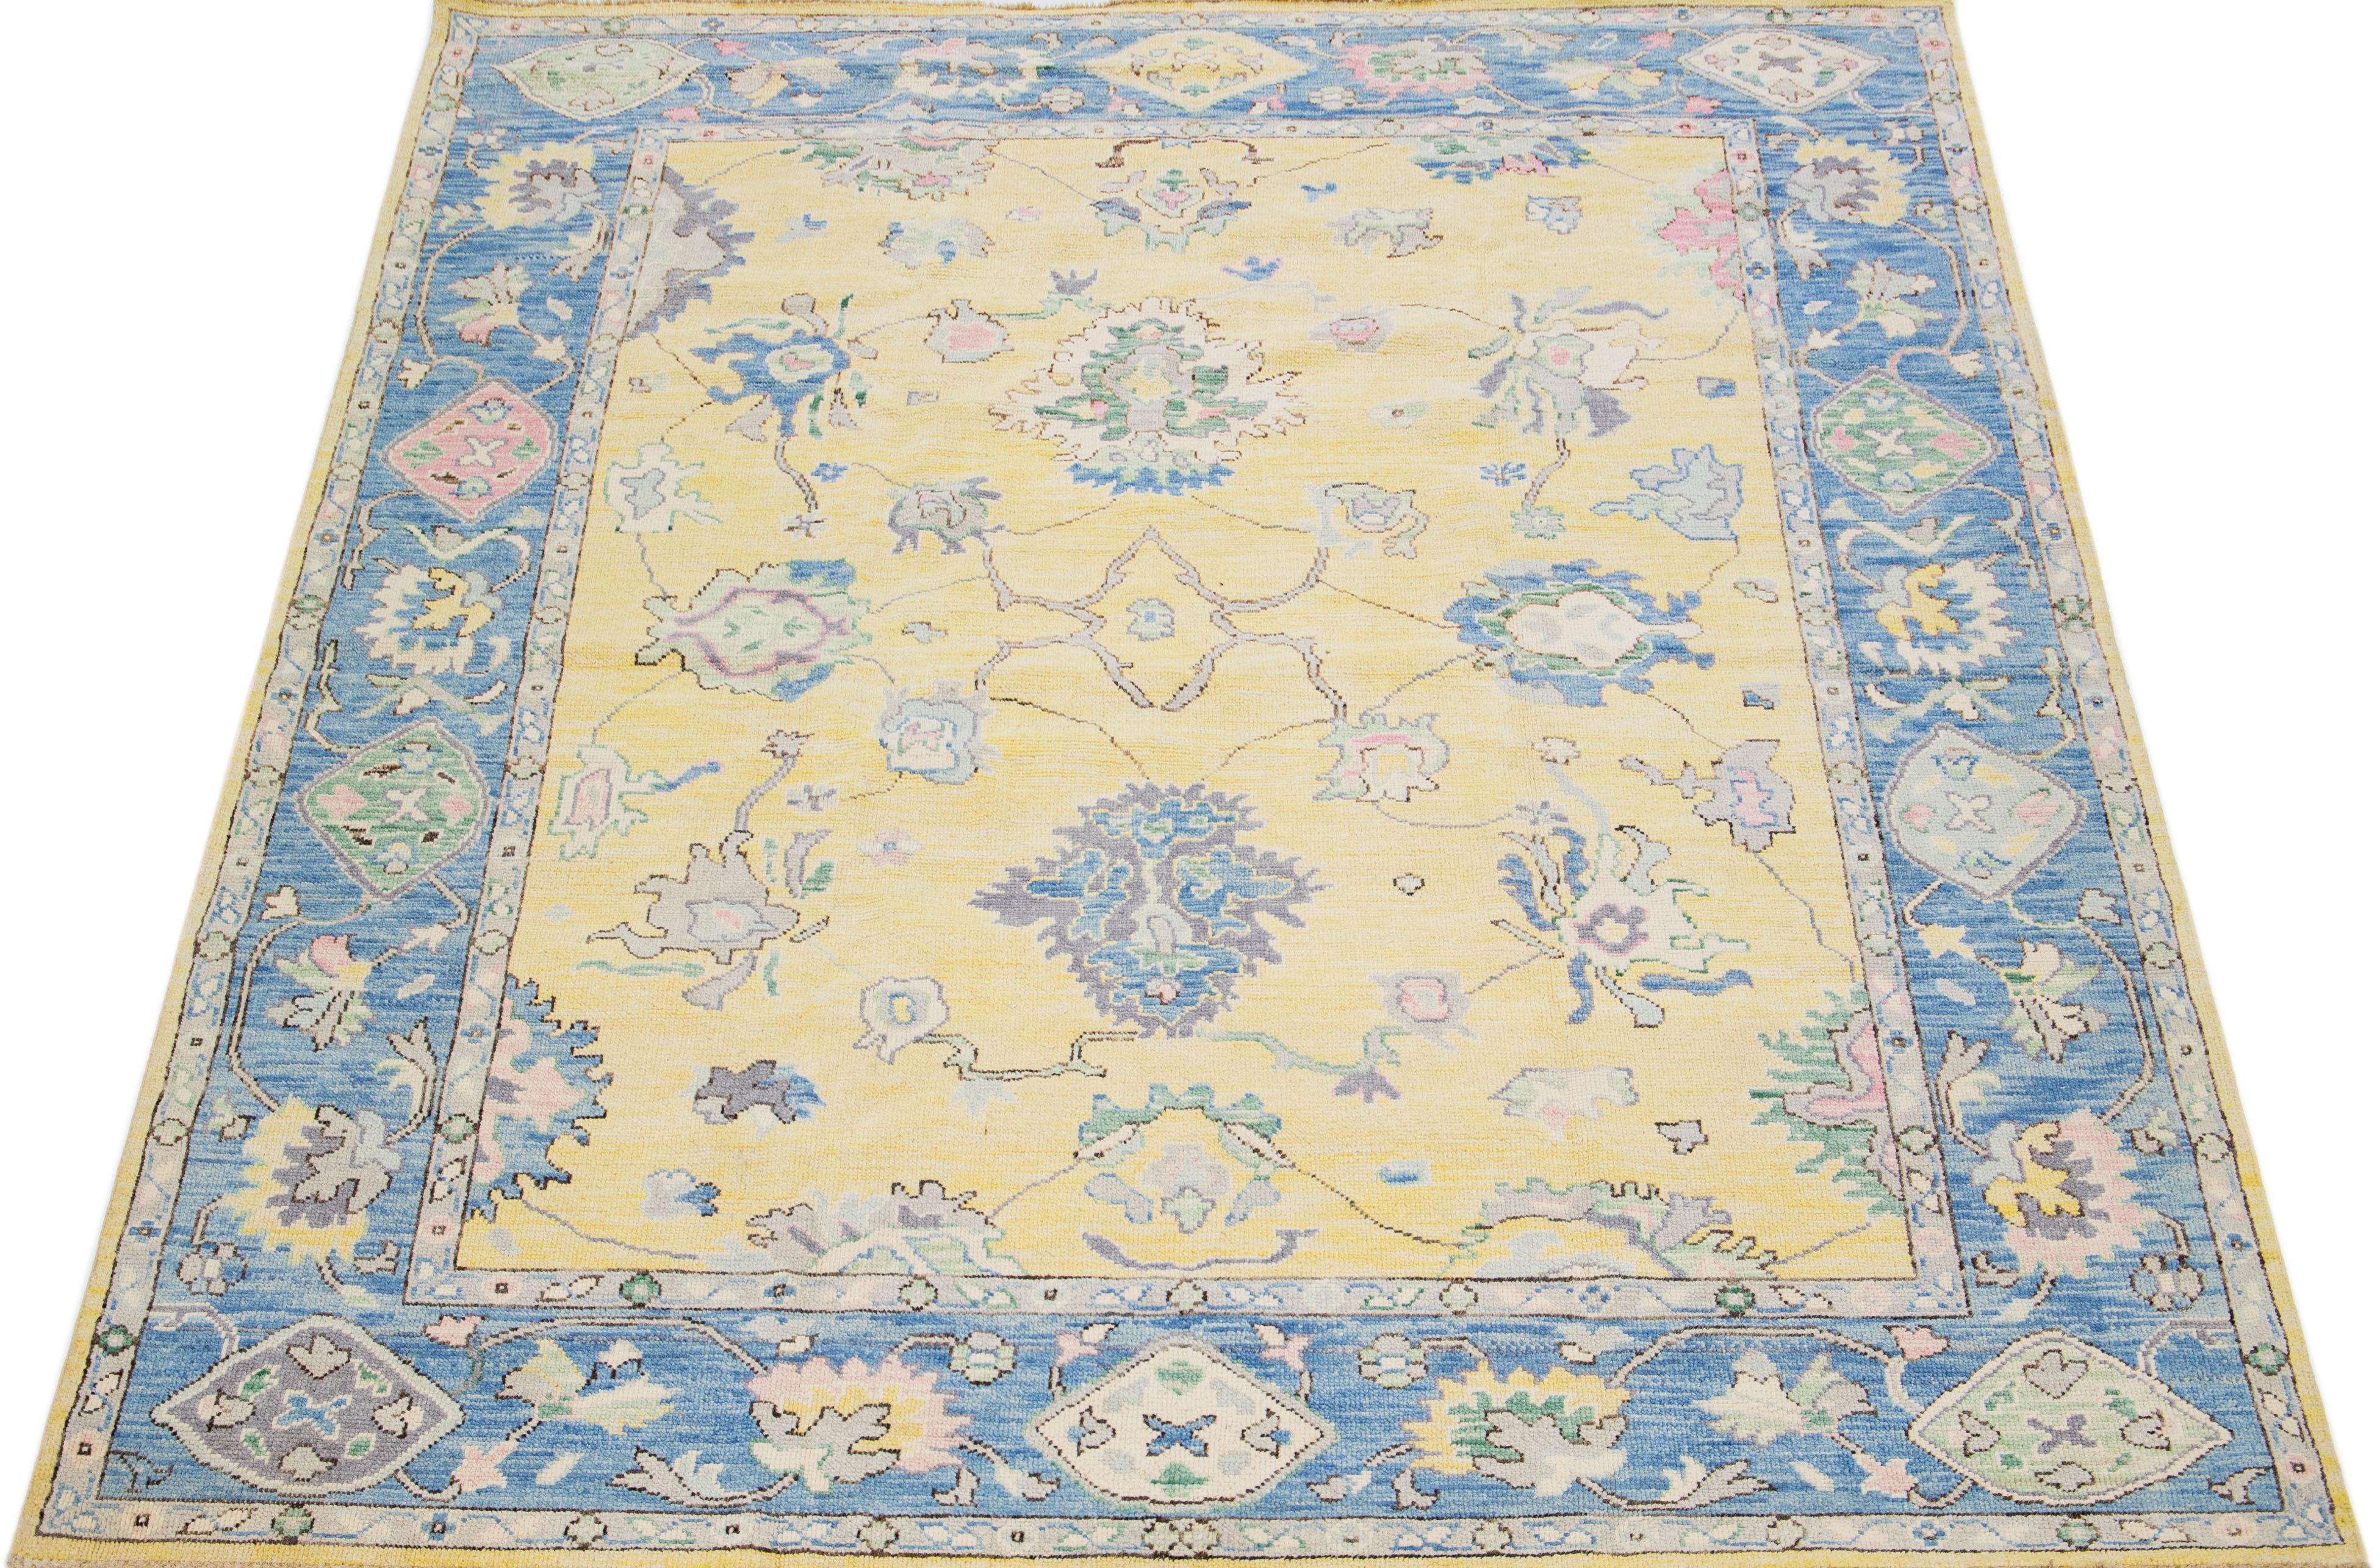 Beautiful modern Oushak hand knotted wool rug with a yellow color field. This Turkish rug has a blue frame with rose, gray, and green accent colors in a gorgeous all-over floral design. This timeless piece is sure to be the focal point of any room